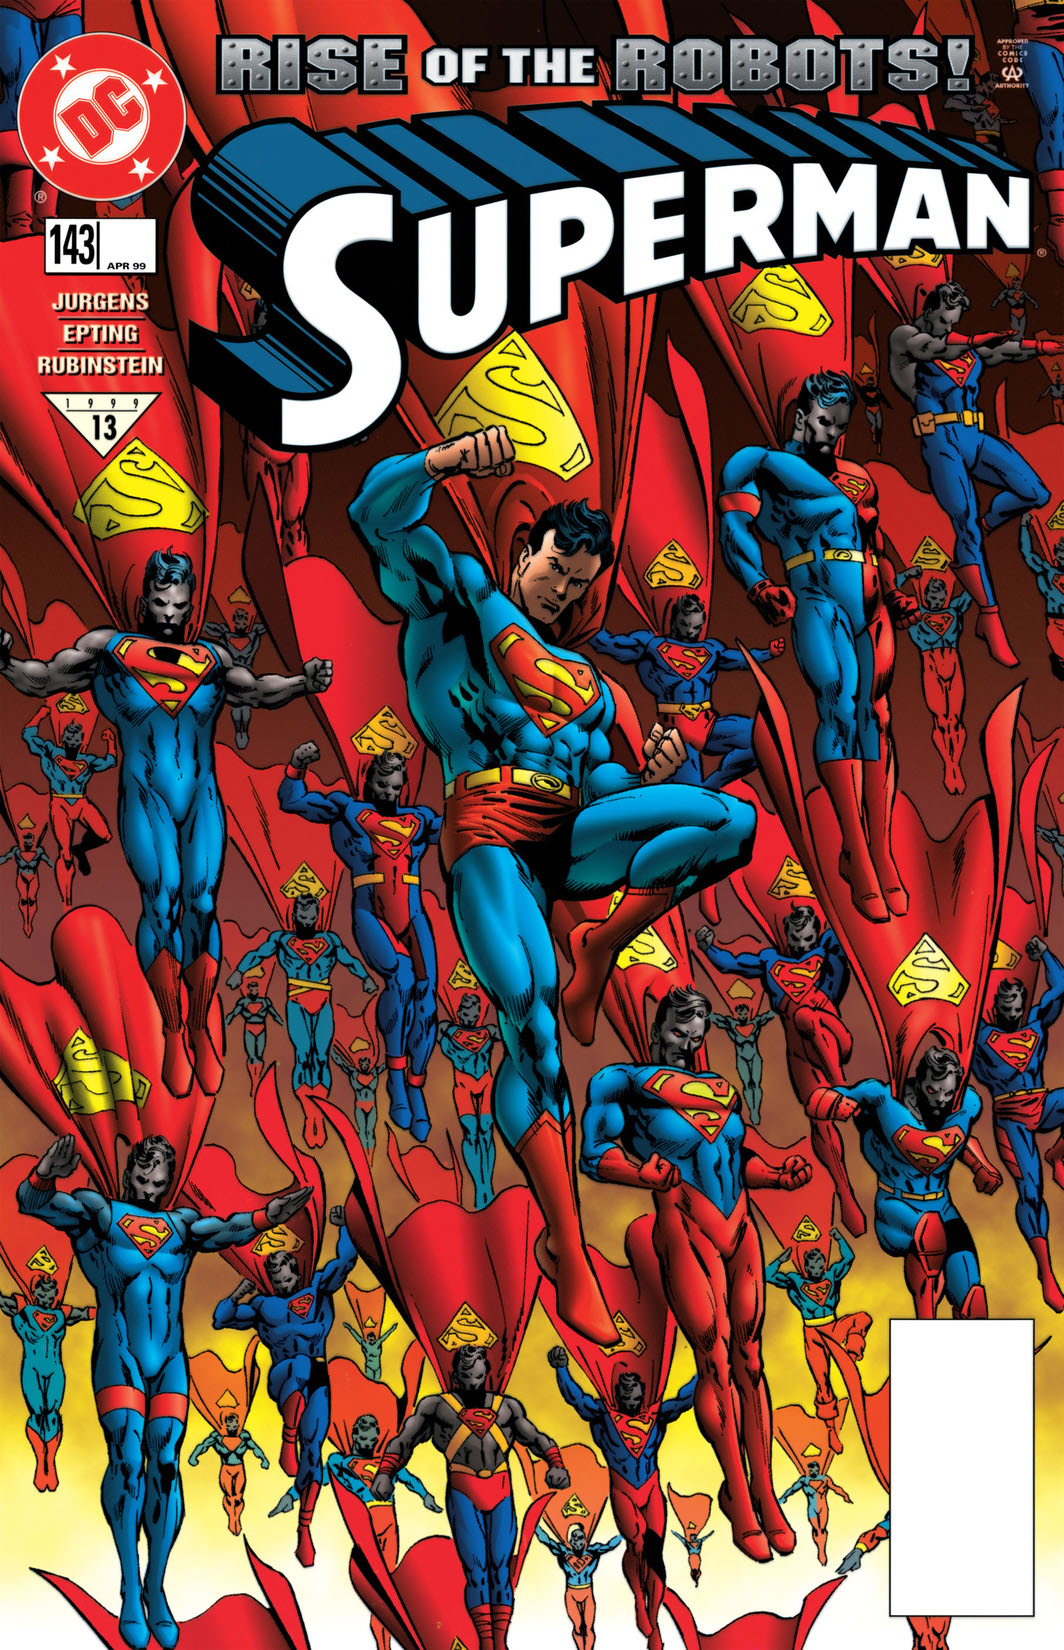 Superman (1986-2006) #143 preview images